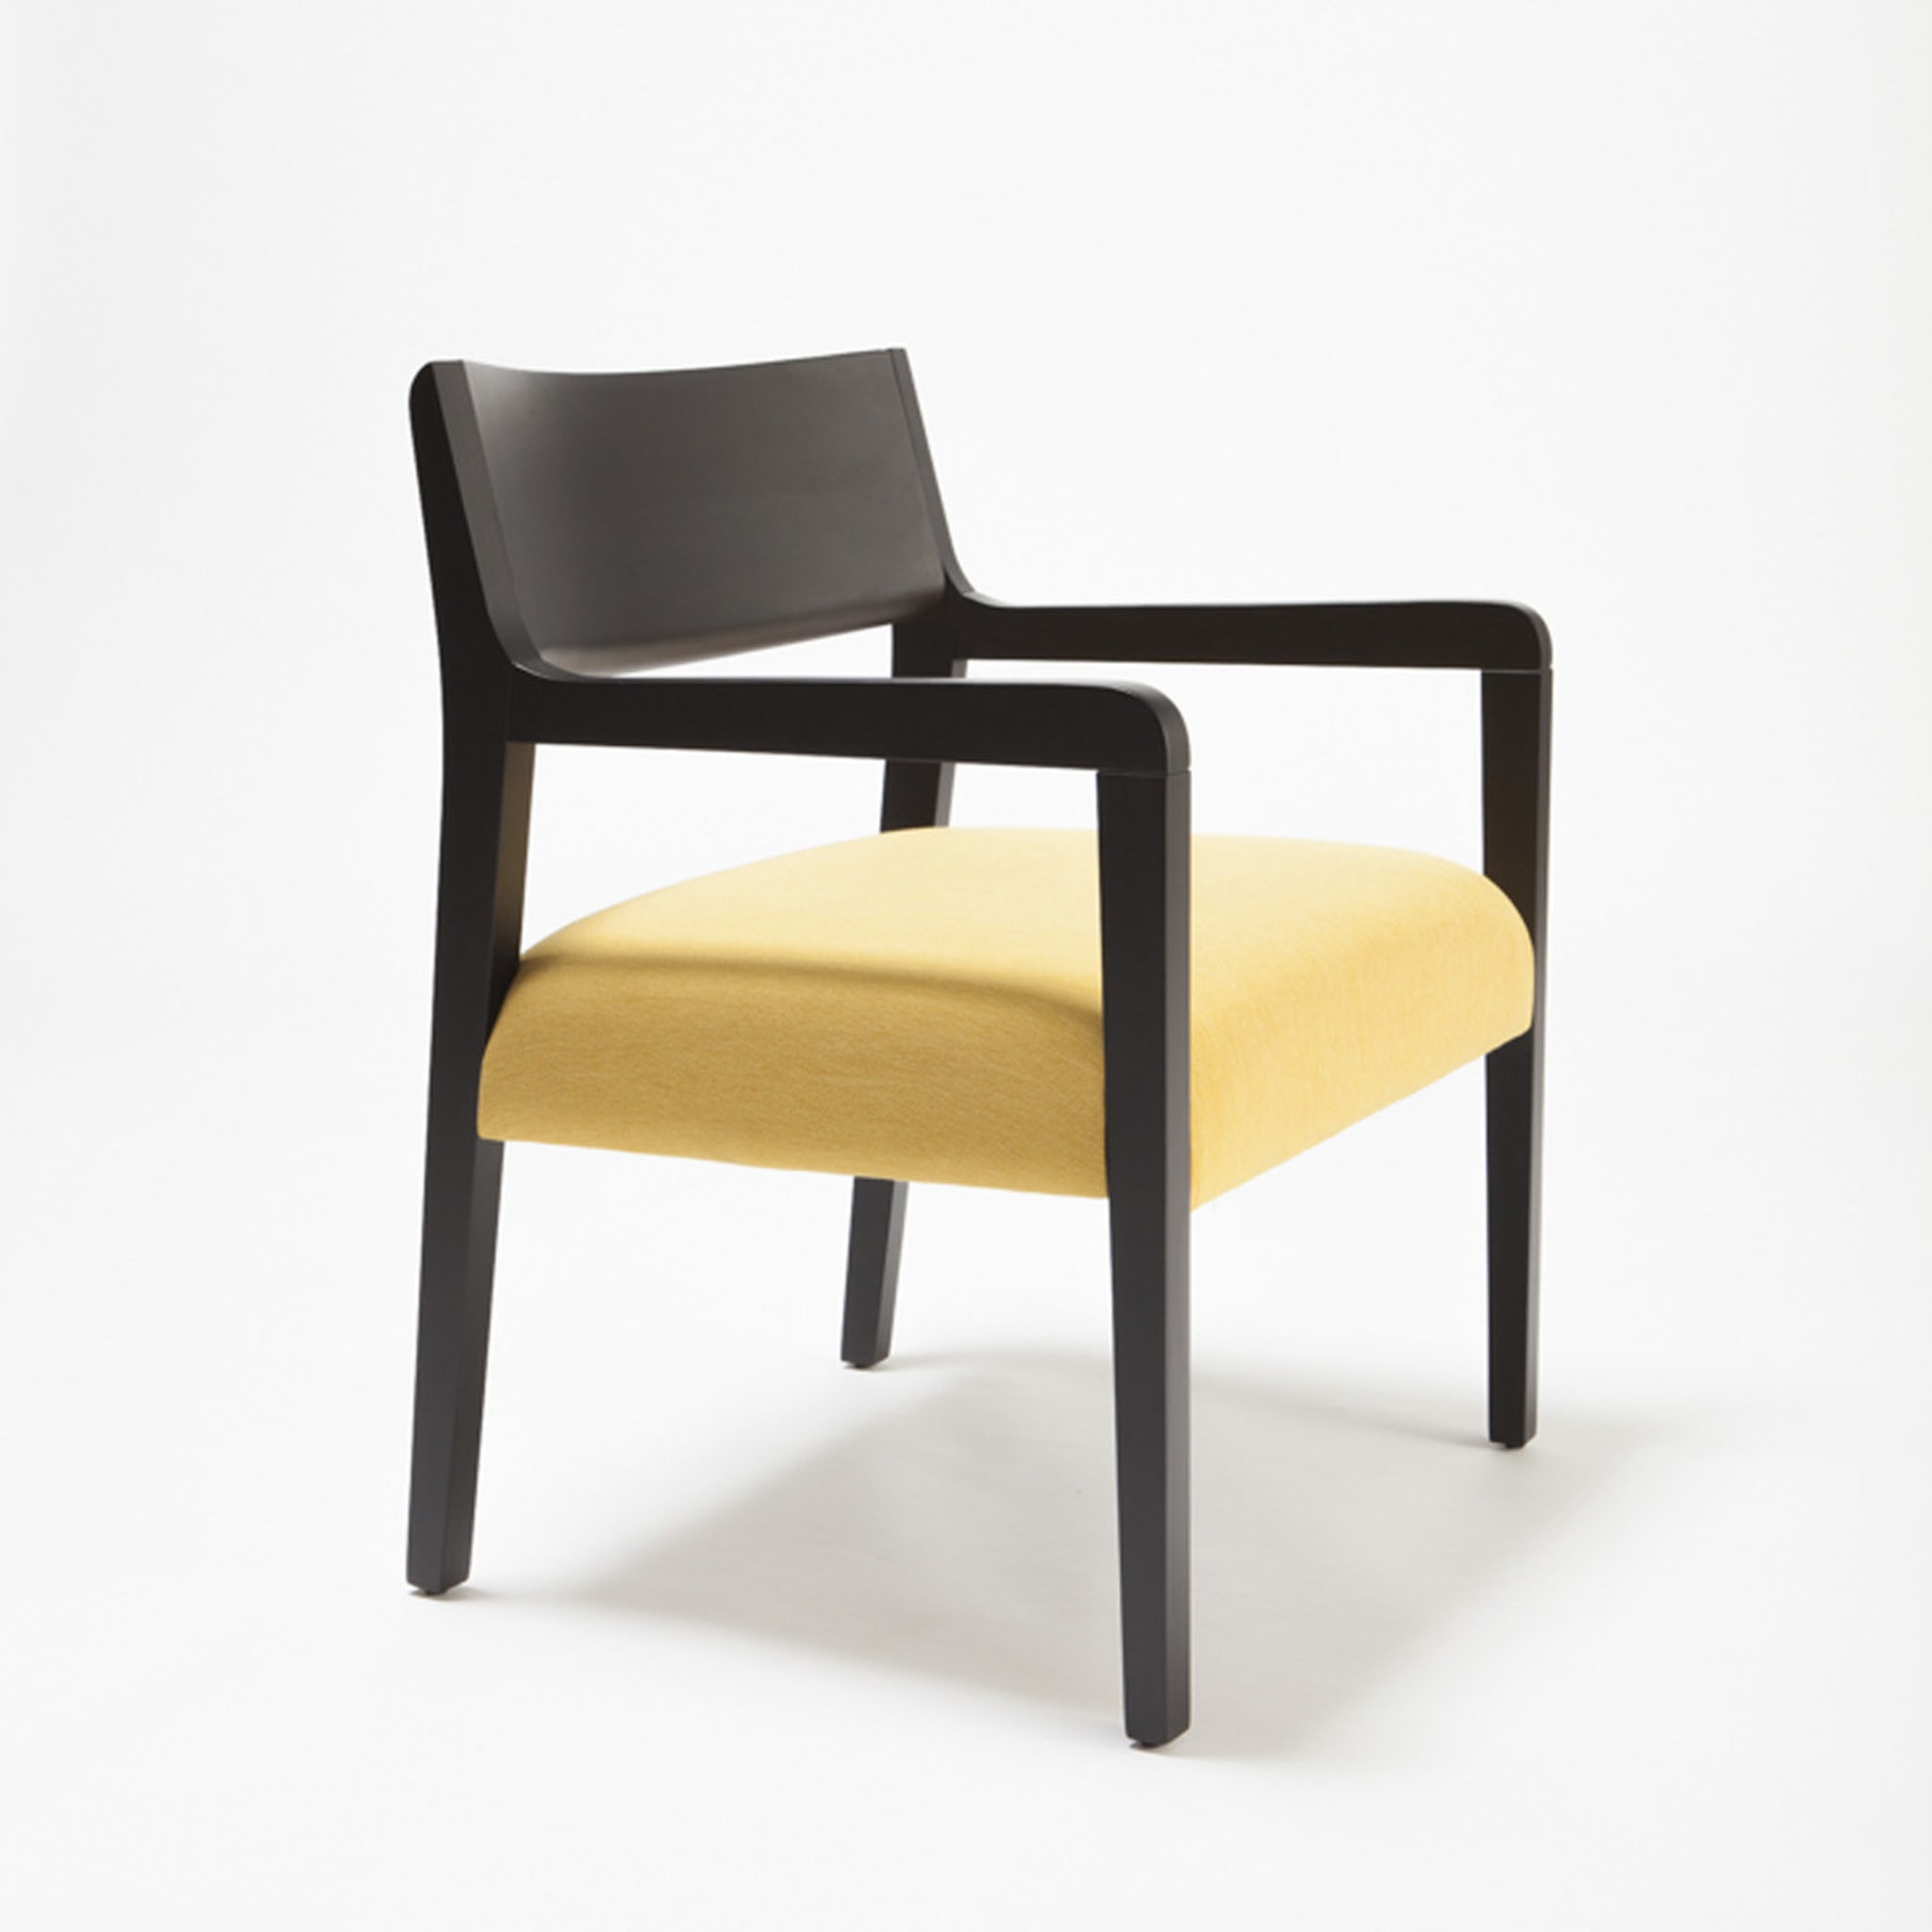 Amarcord Lounge Chair - Alternative view 1